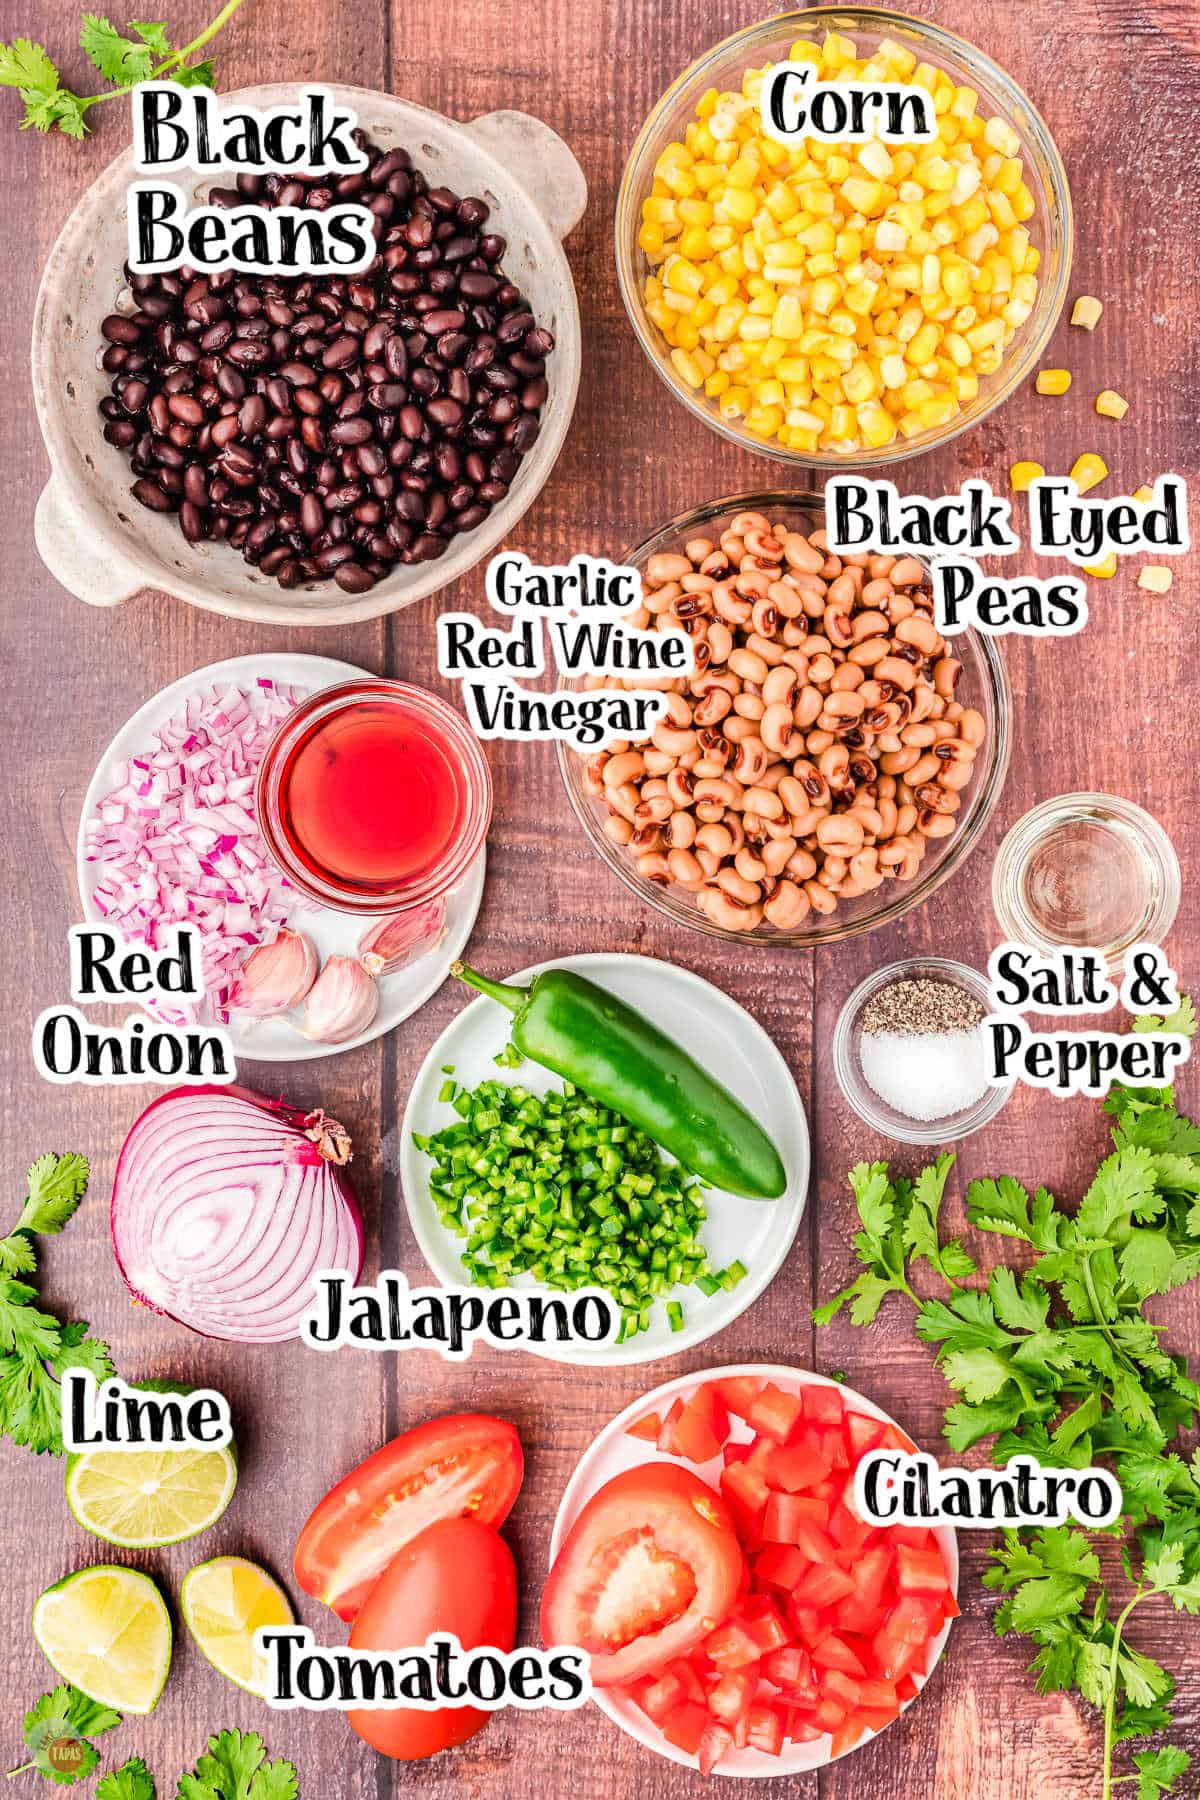 Wooden table with ingredients for Cowboy Caviar on it and labels denoting each one including  cilantri, tomatoes, limes, jalapeno, red onion, black eyed peas, garlic red wine vinegar, corn and black beans. 